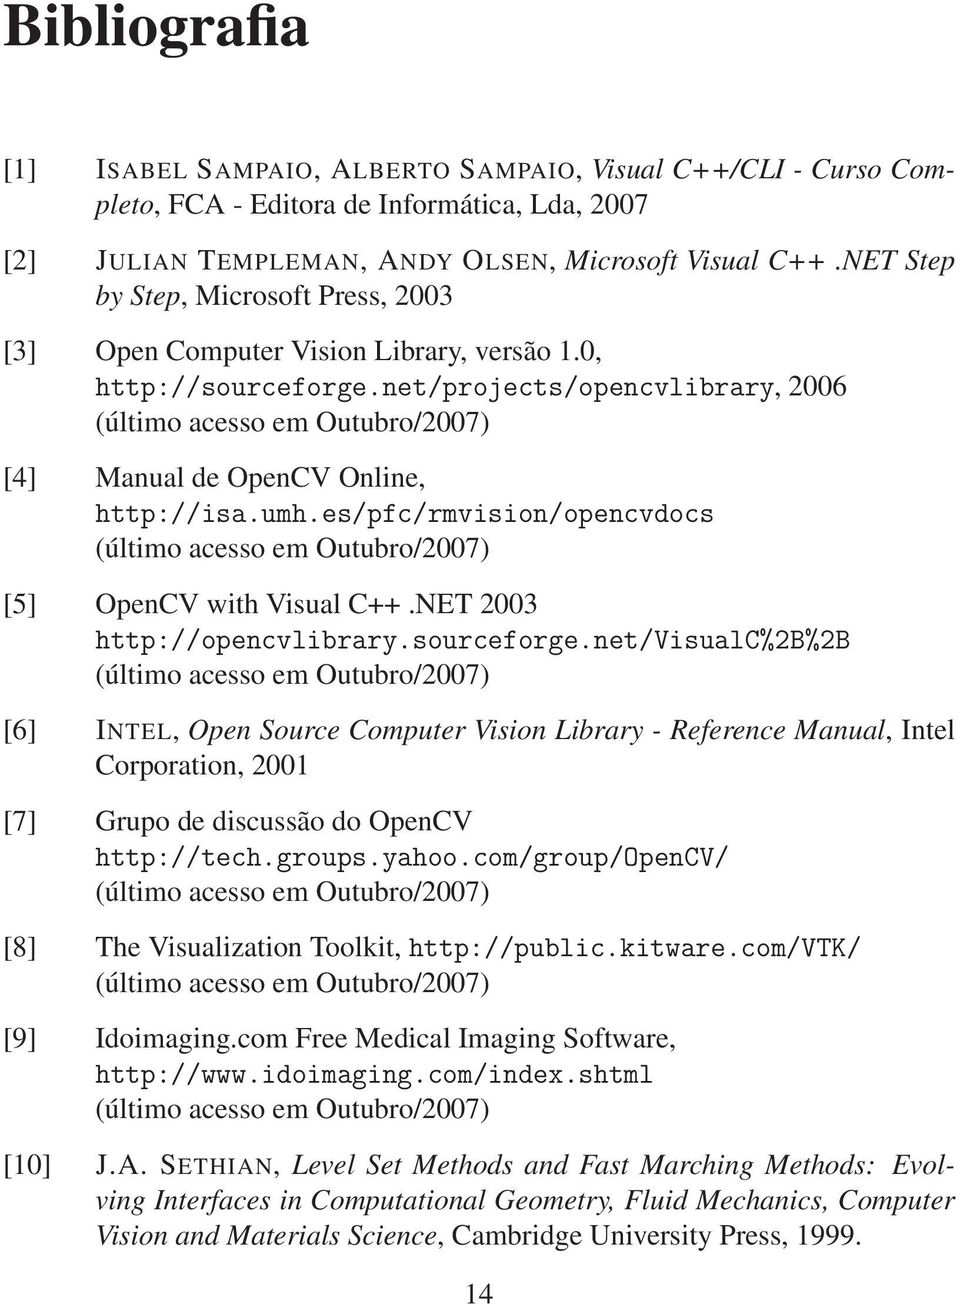 net/projects/opencvlibrary, 2006 (último acesso em Outubro/2007) [4] Manual de OpenCV Online, http://isa.umh.es/pfc/rmvision/opencvdocs (último acesso em Outubro/2007) [5] OpenCV with Visual C++.